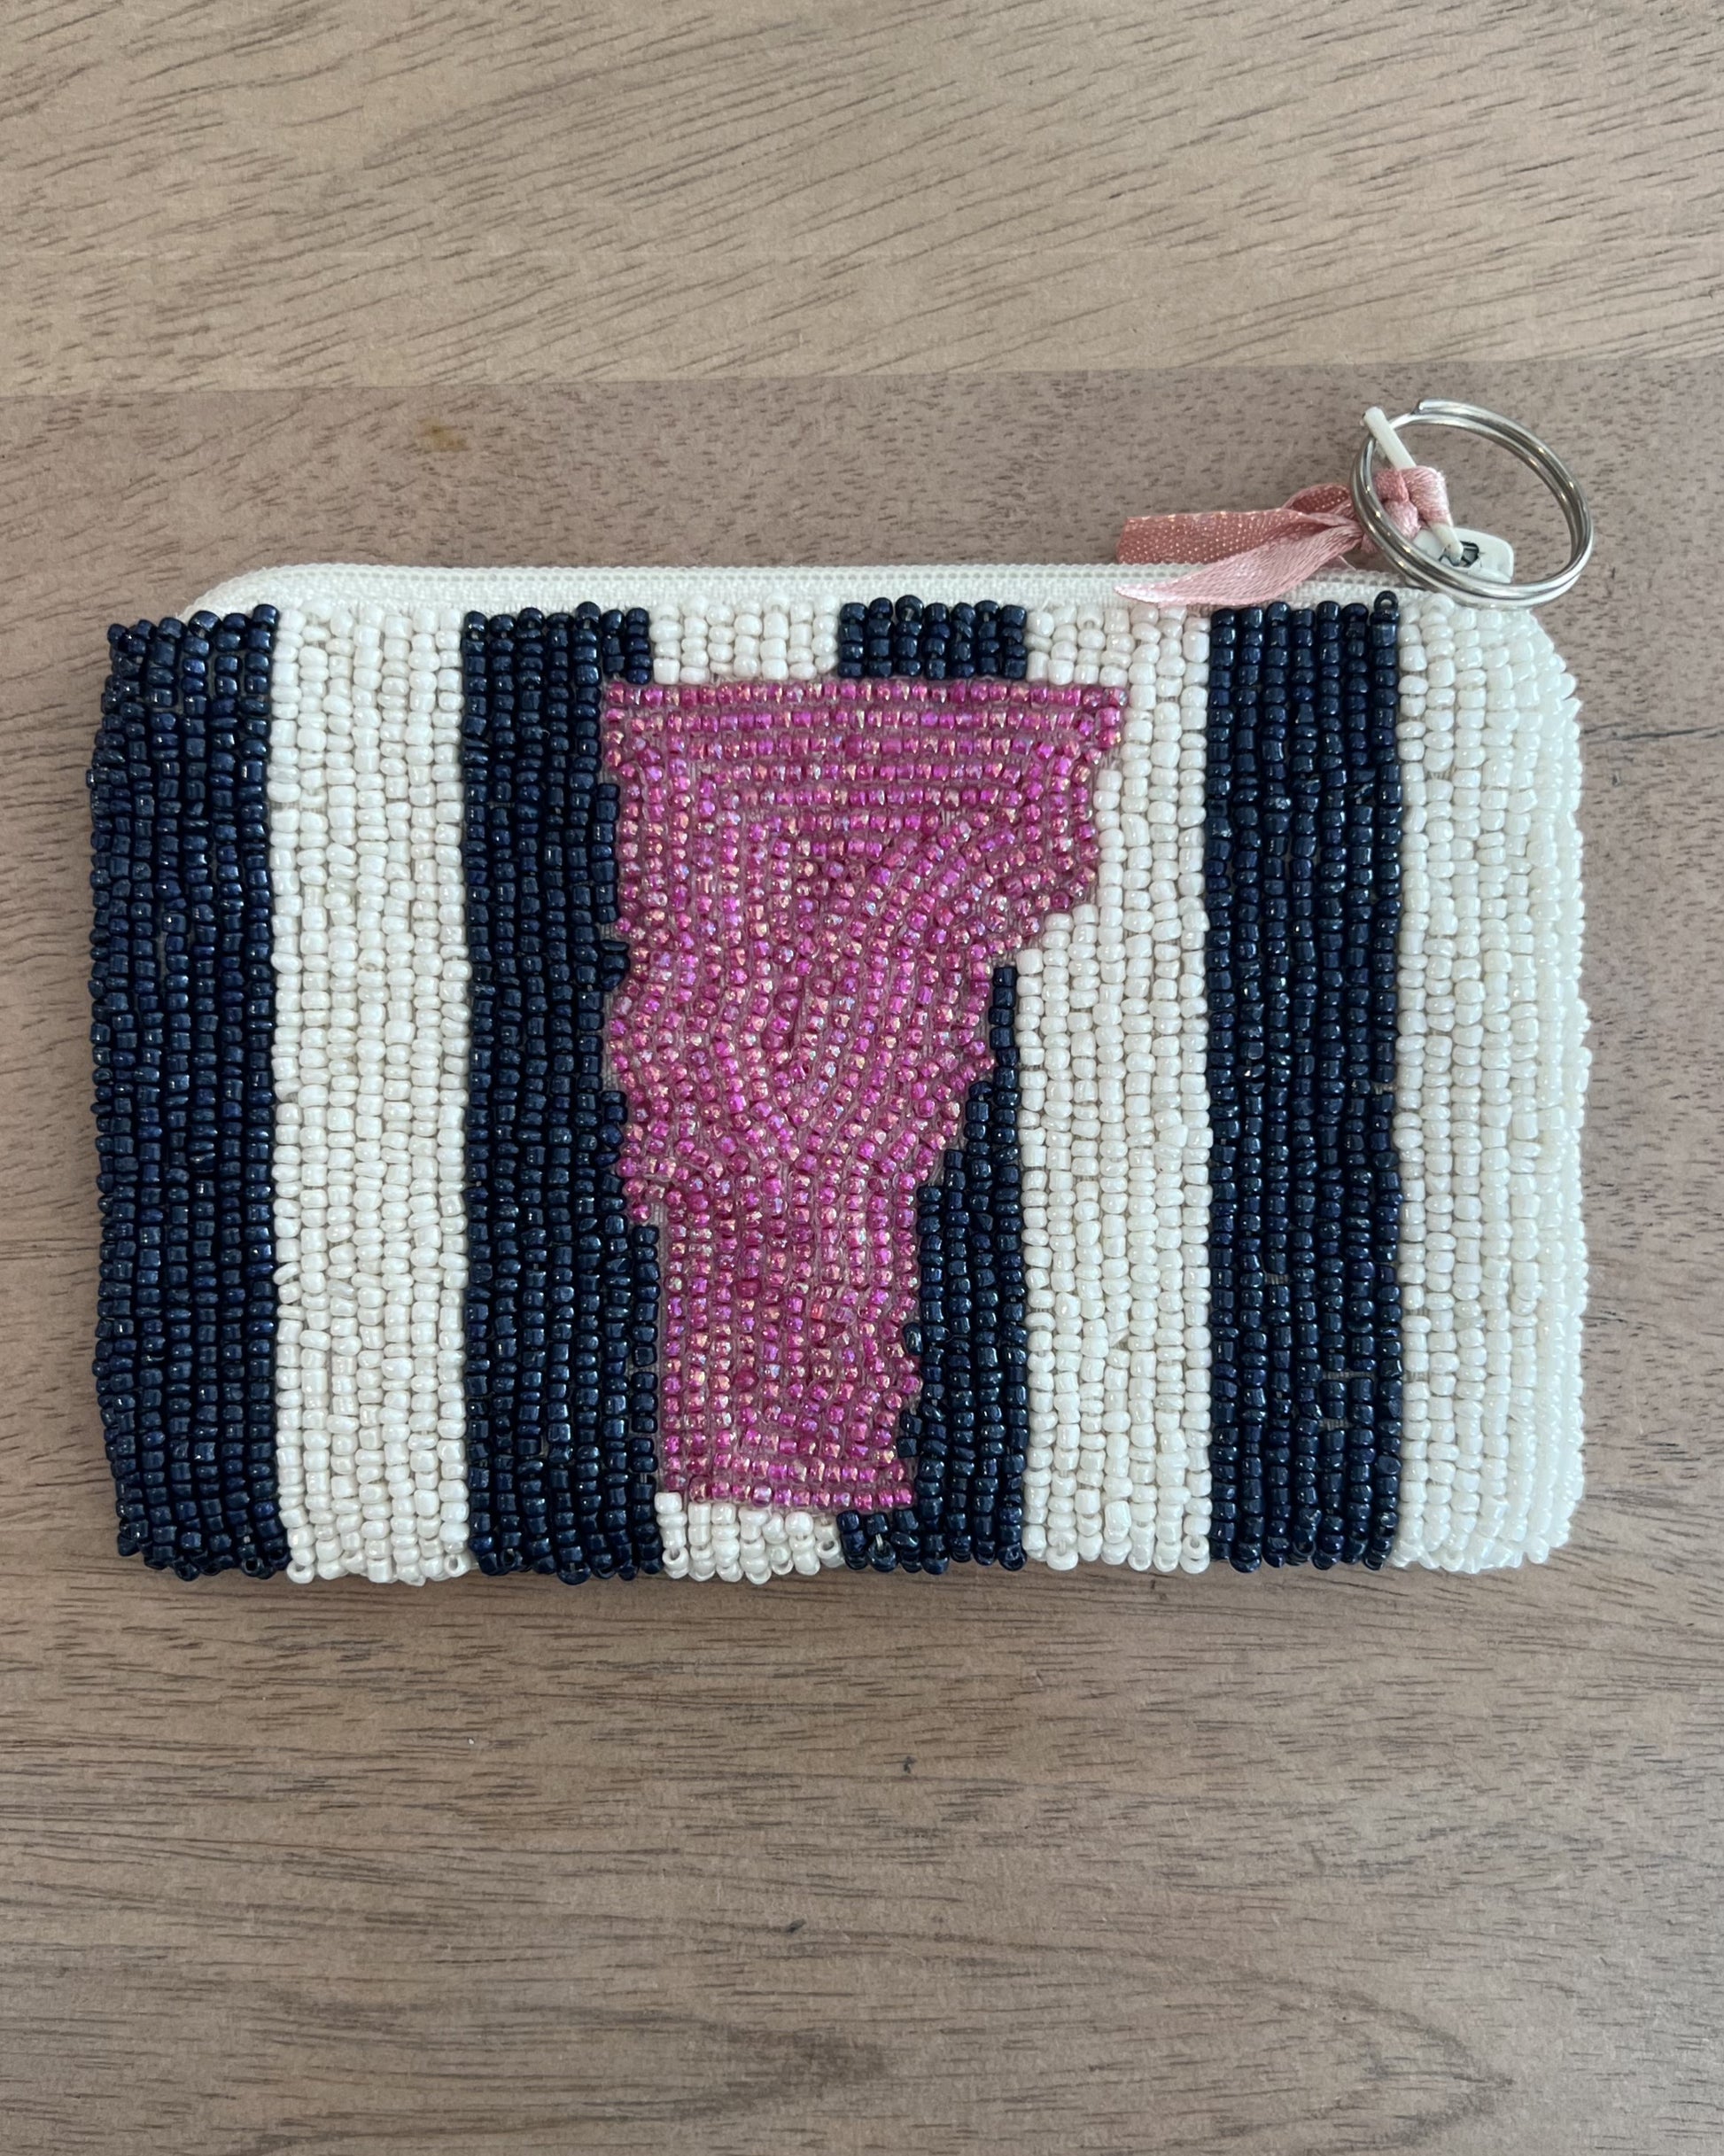 Image of Middlebury Vermont State Coin purse with pink and blue/white stripes on a brown background